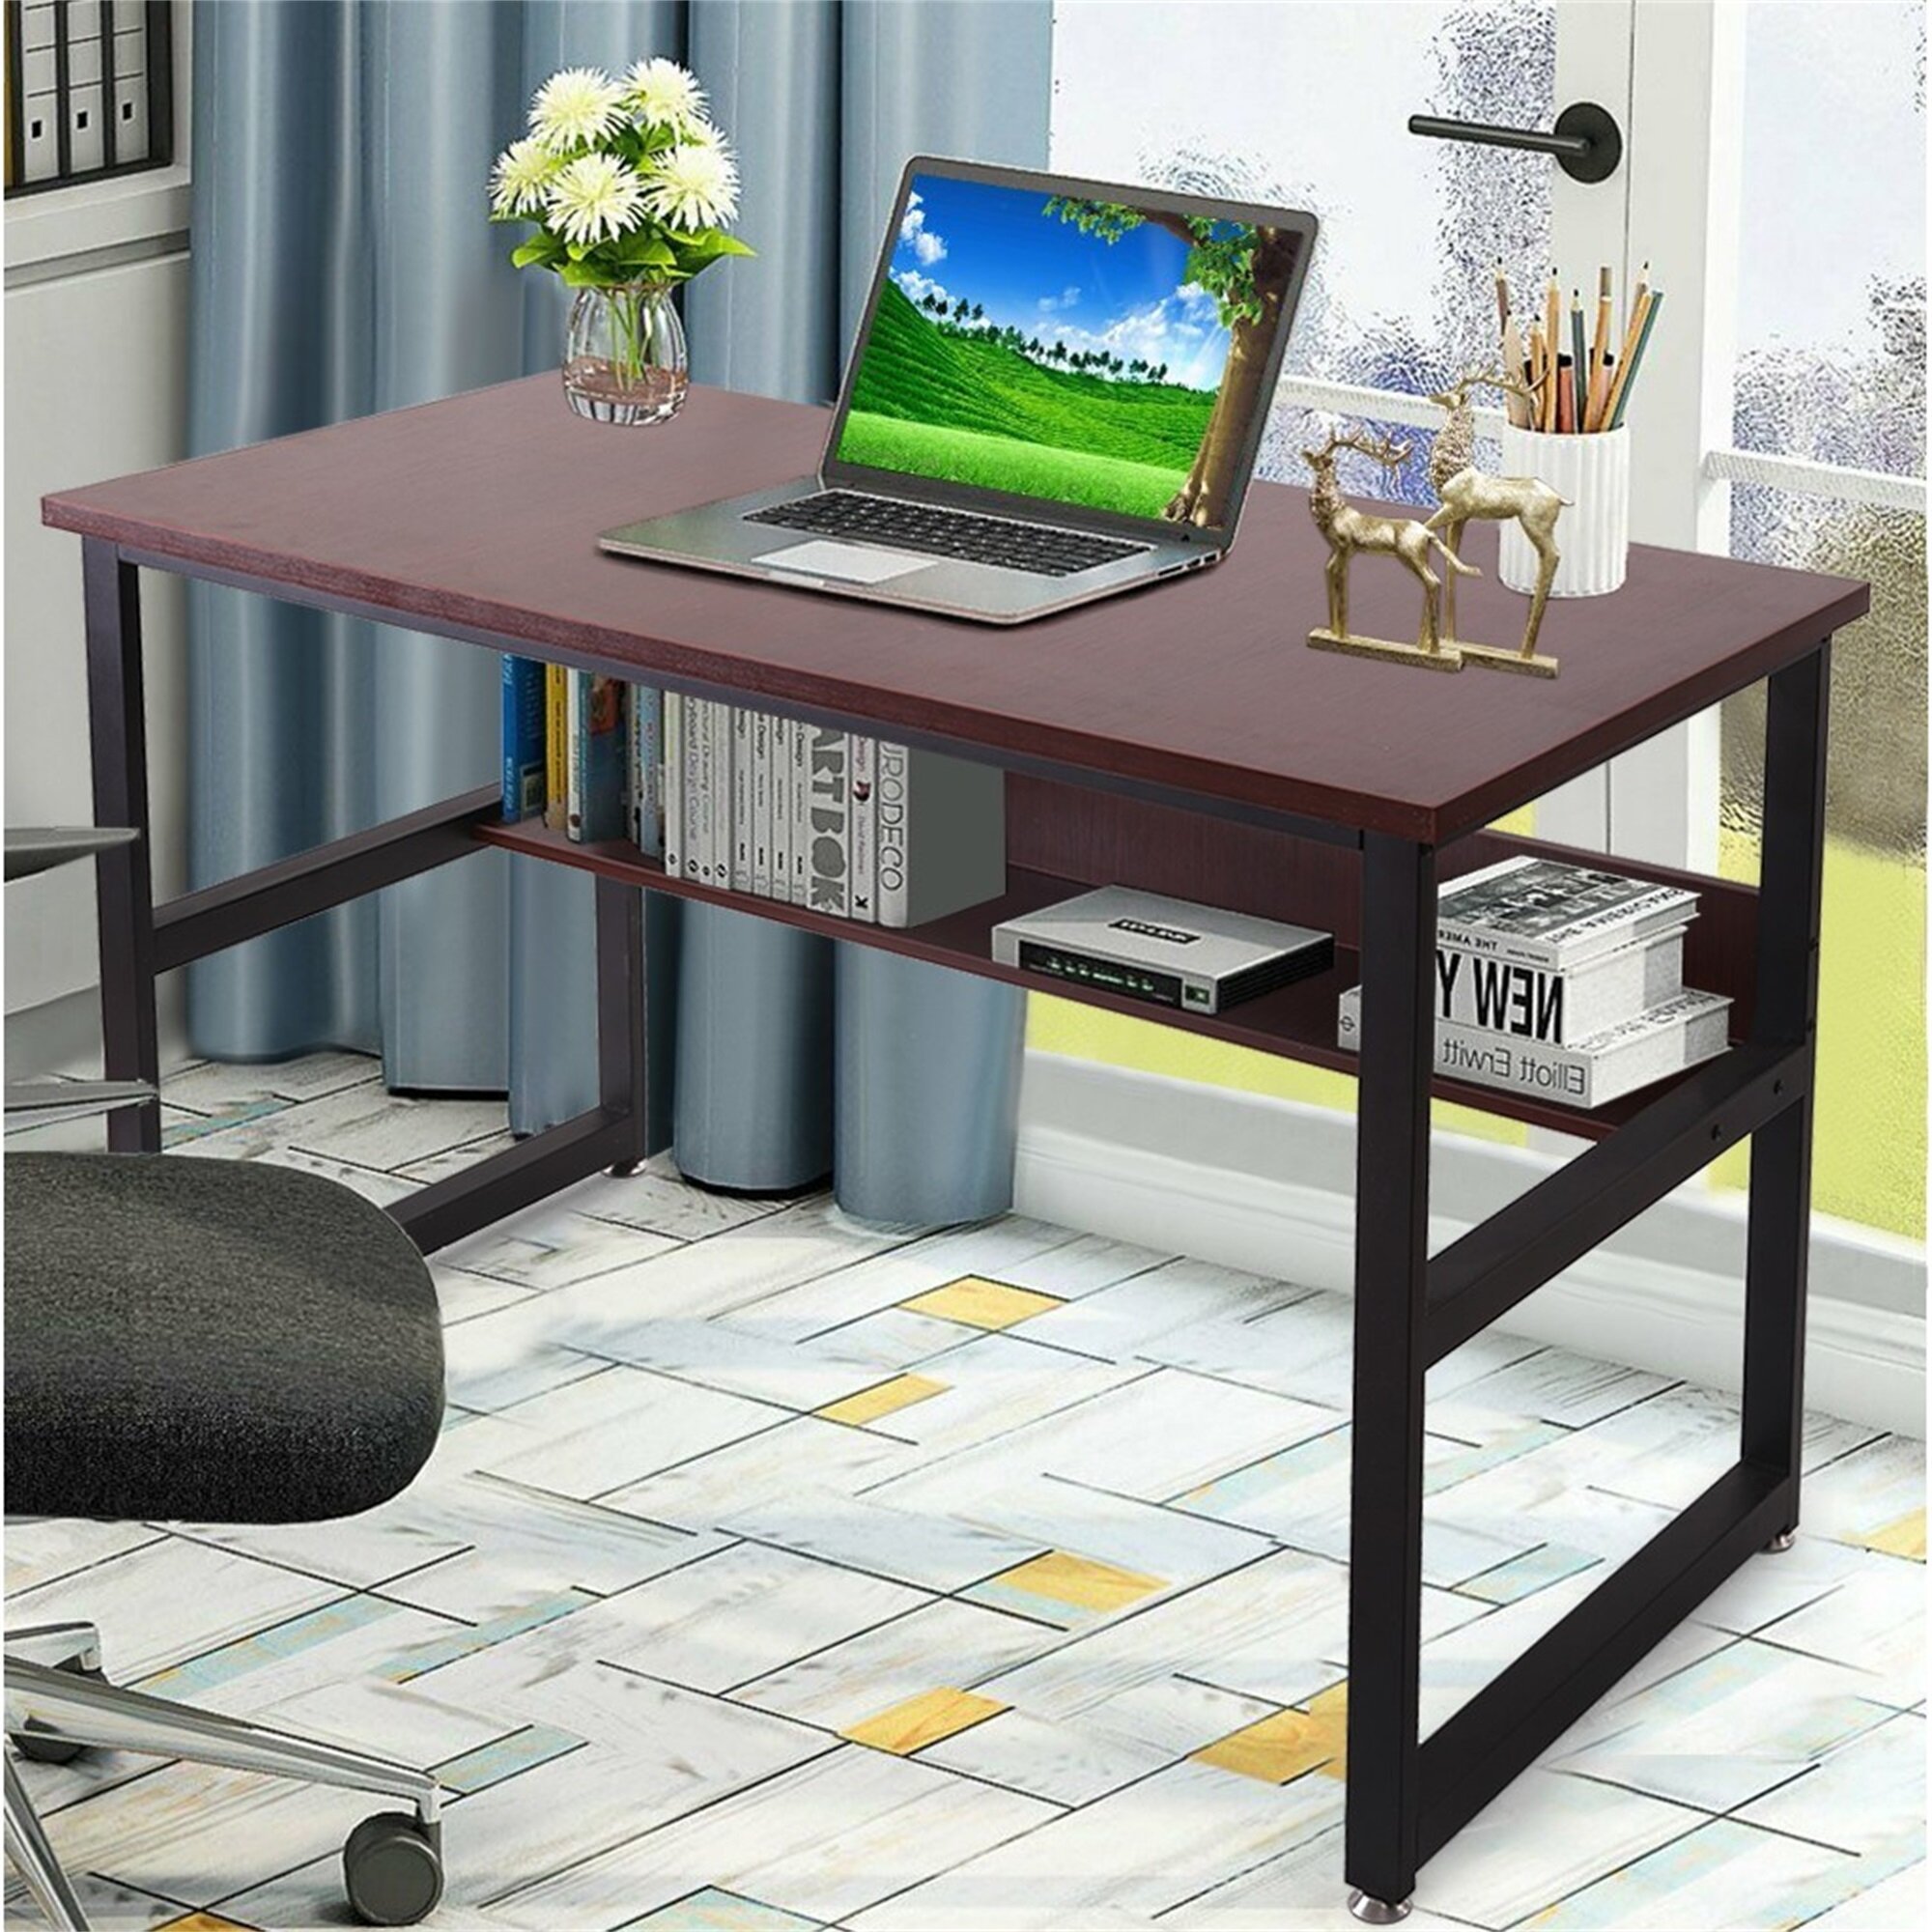 Details about   Folding Study Desk Home Office Desk Simple Laptop Writing Table Workstation New 